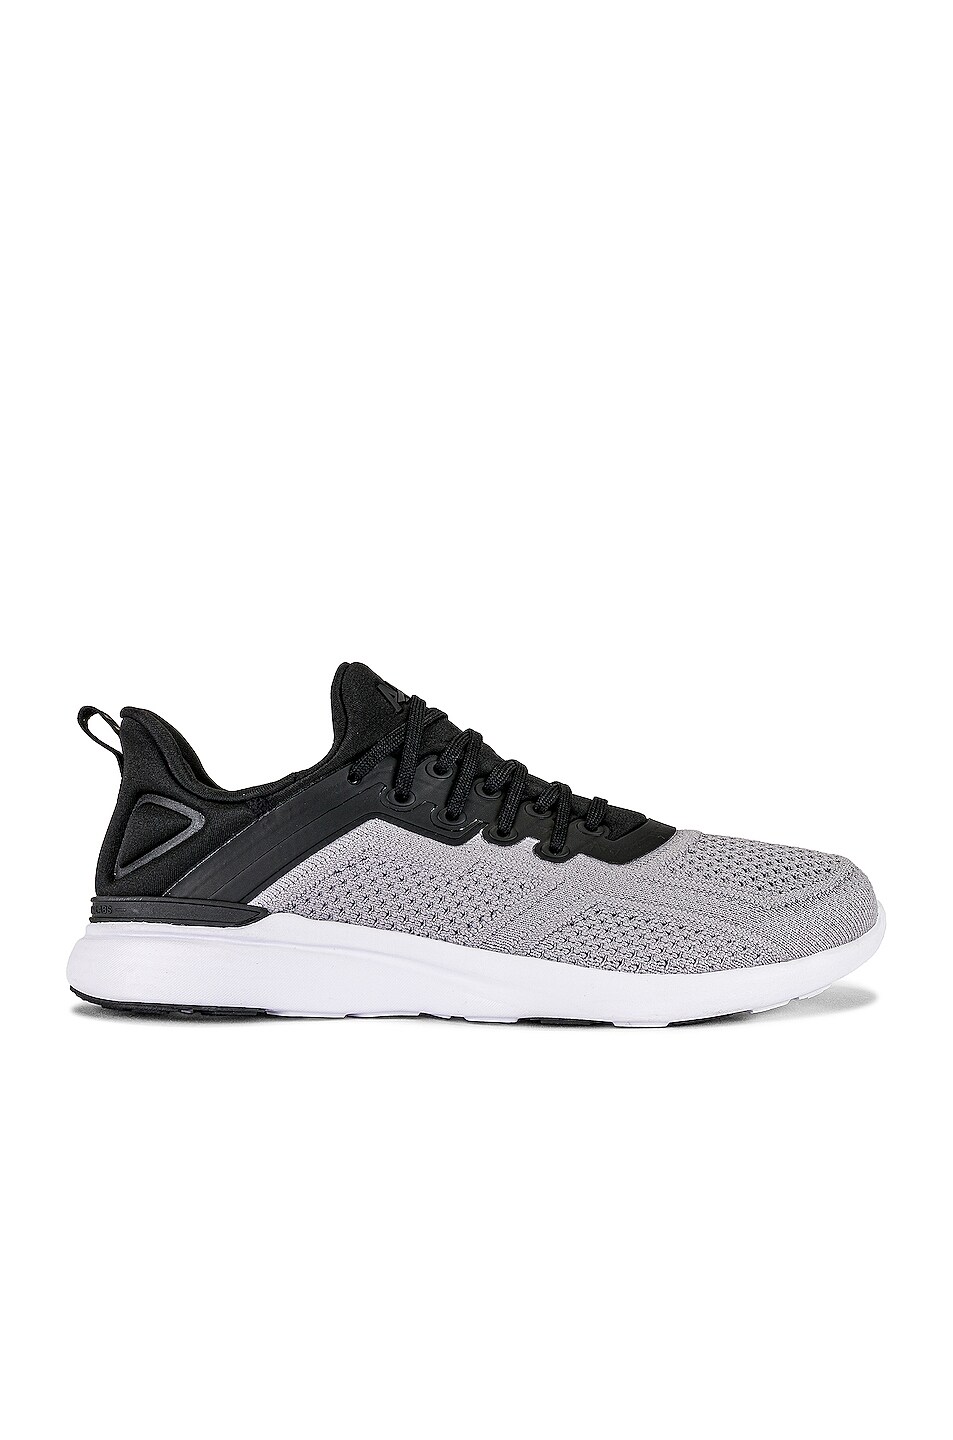 Image 1 of APL: Athletic Propulsion Labs Techloom Tracer in Black, Cement & White